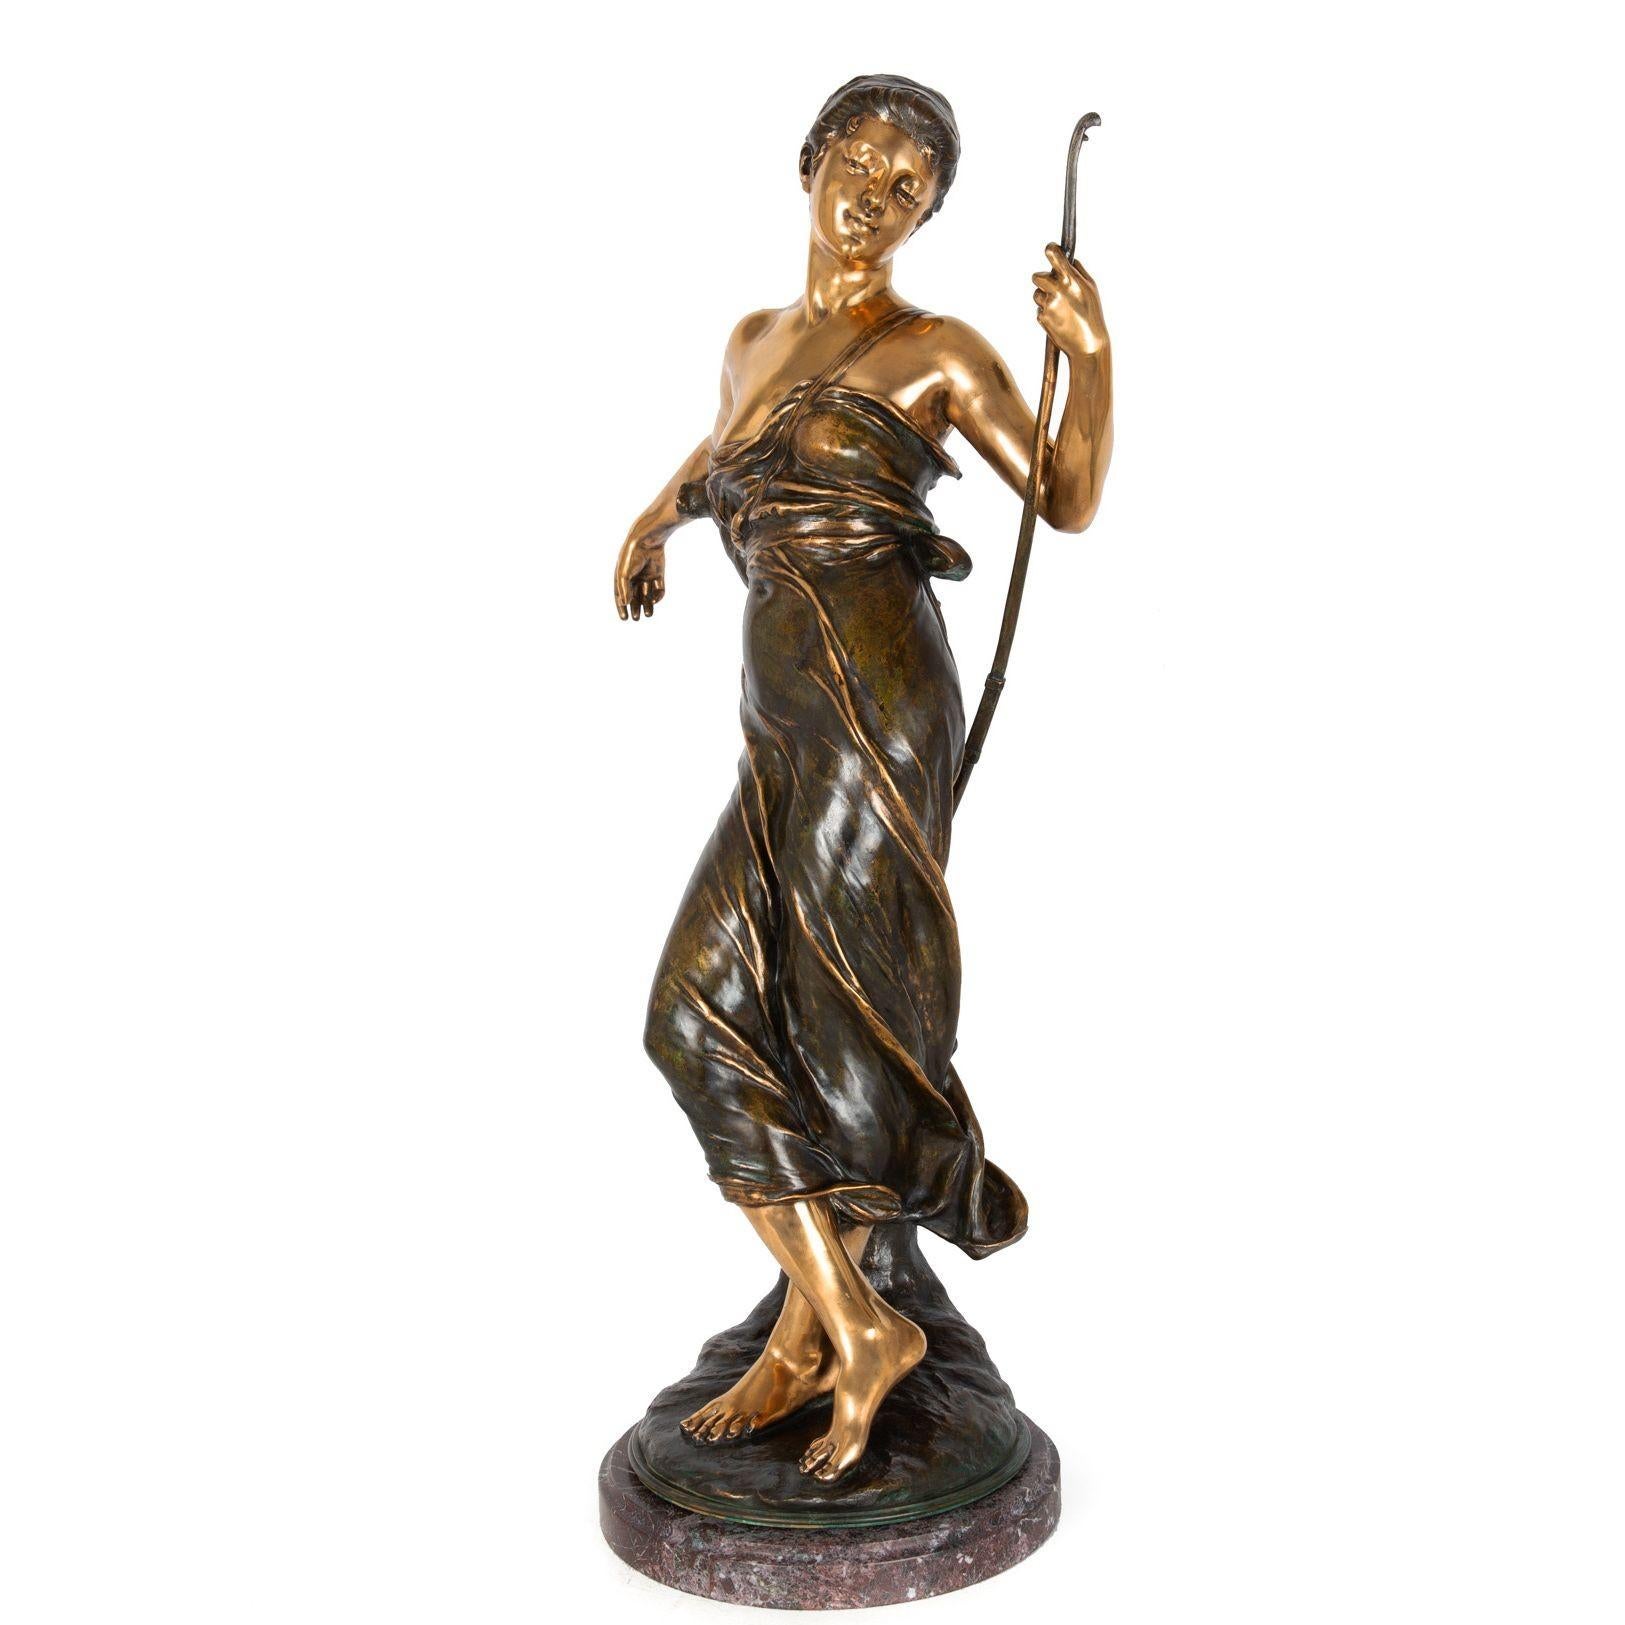 EUGÈNE MARIOTON
French, 1857-1933

Diana, the Huntress

Patinated and burnished bronze  signed to base 